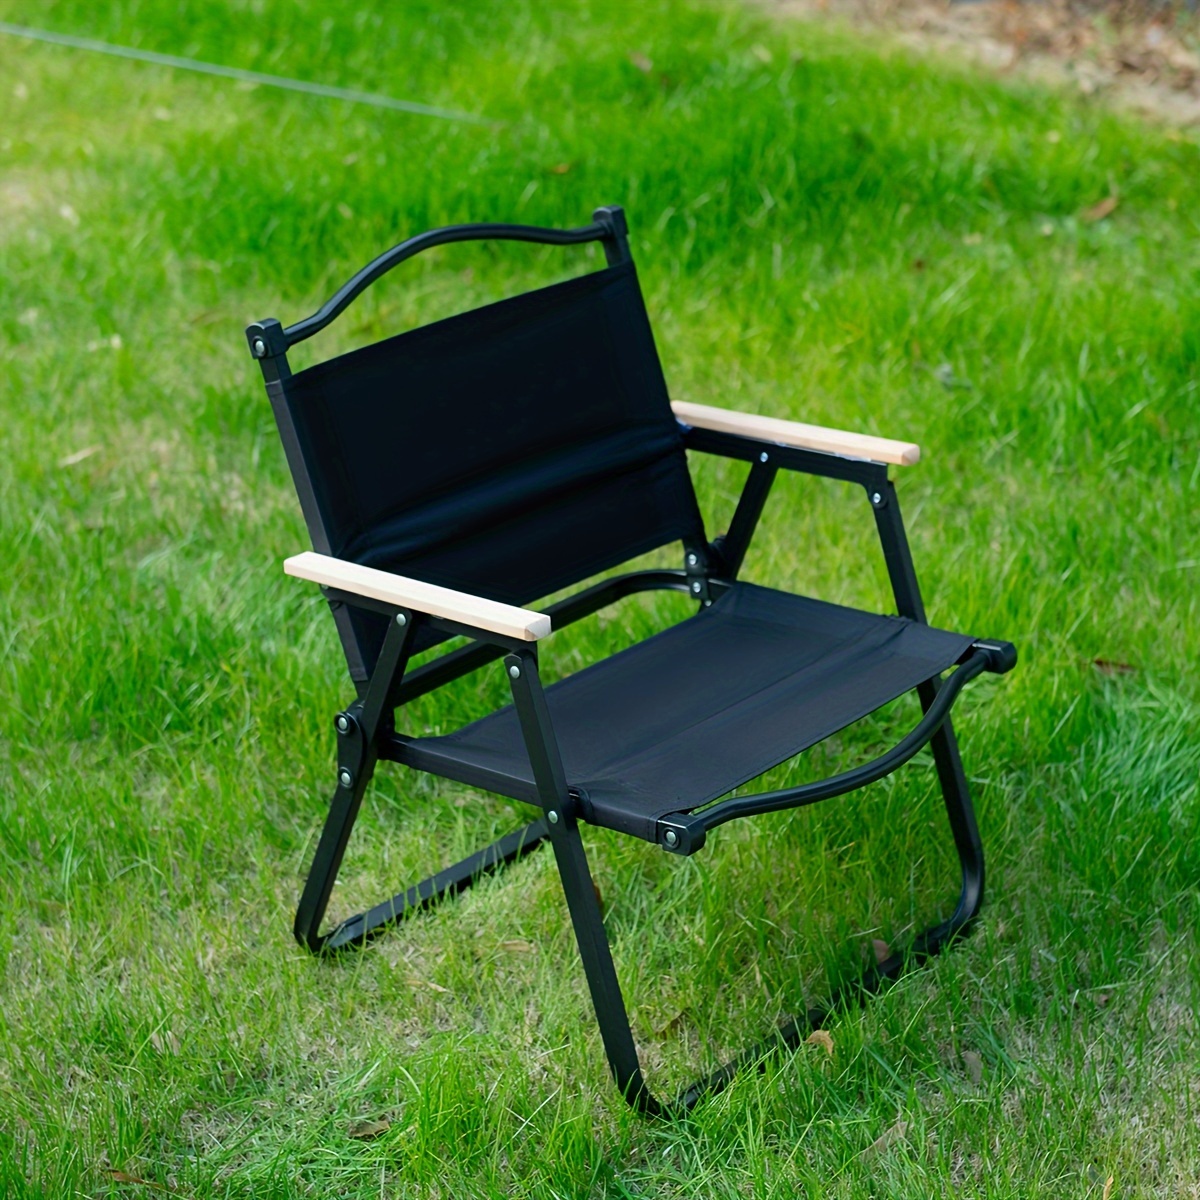 Heavy Duty Portable Folding Chair For Indoor And Outdoor Use